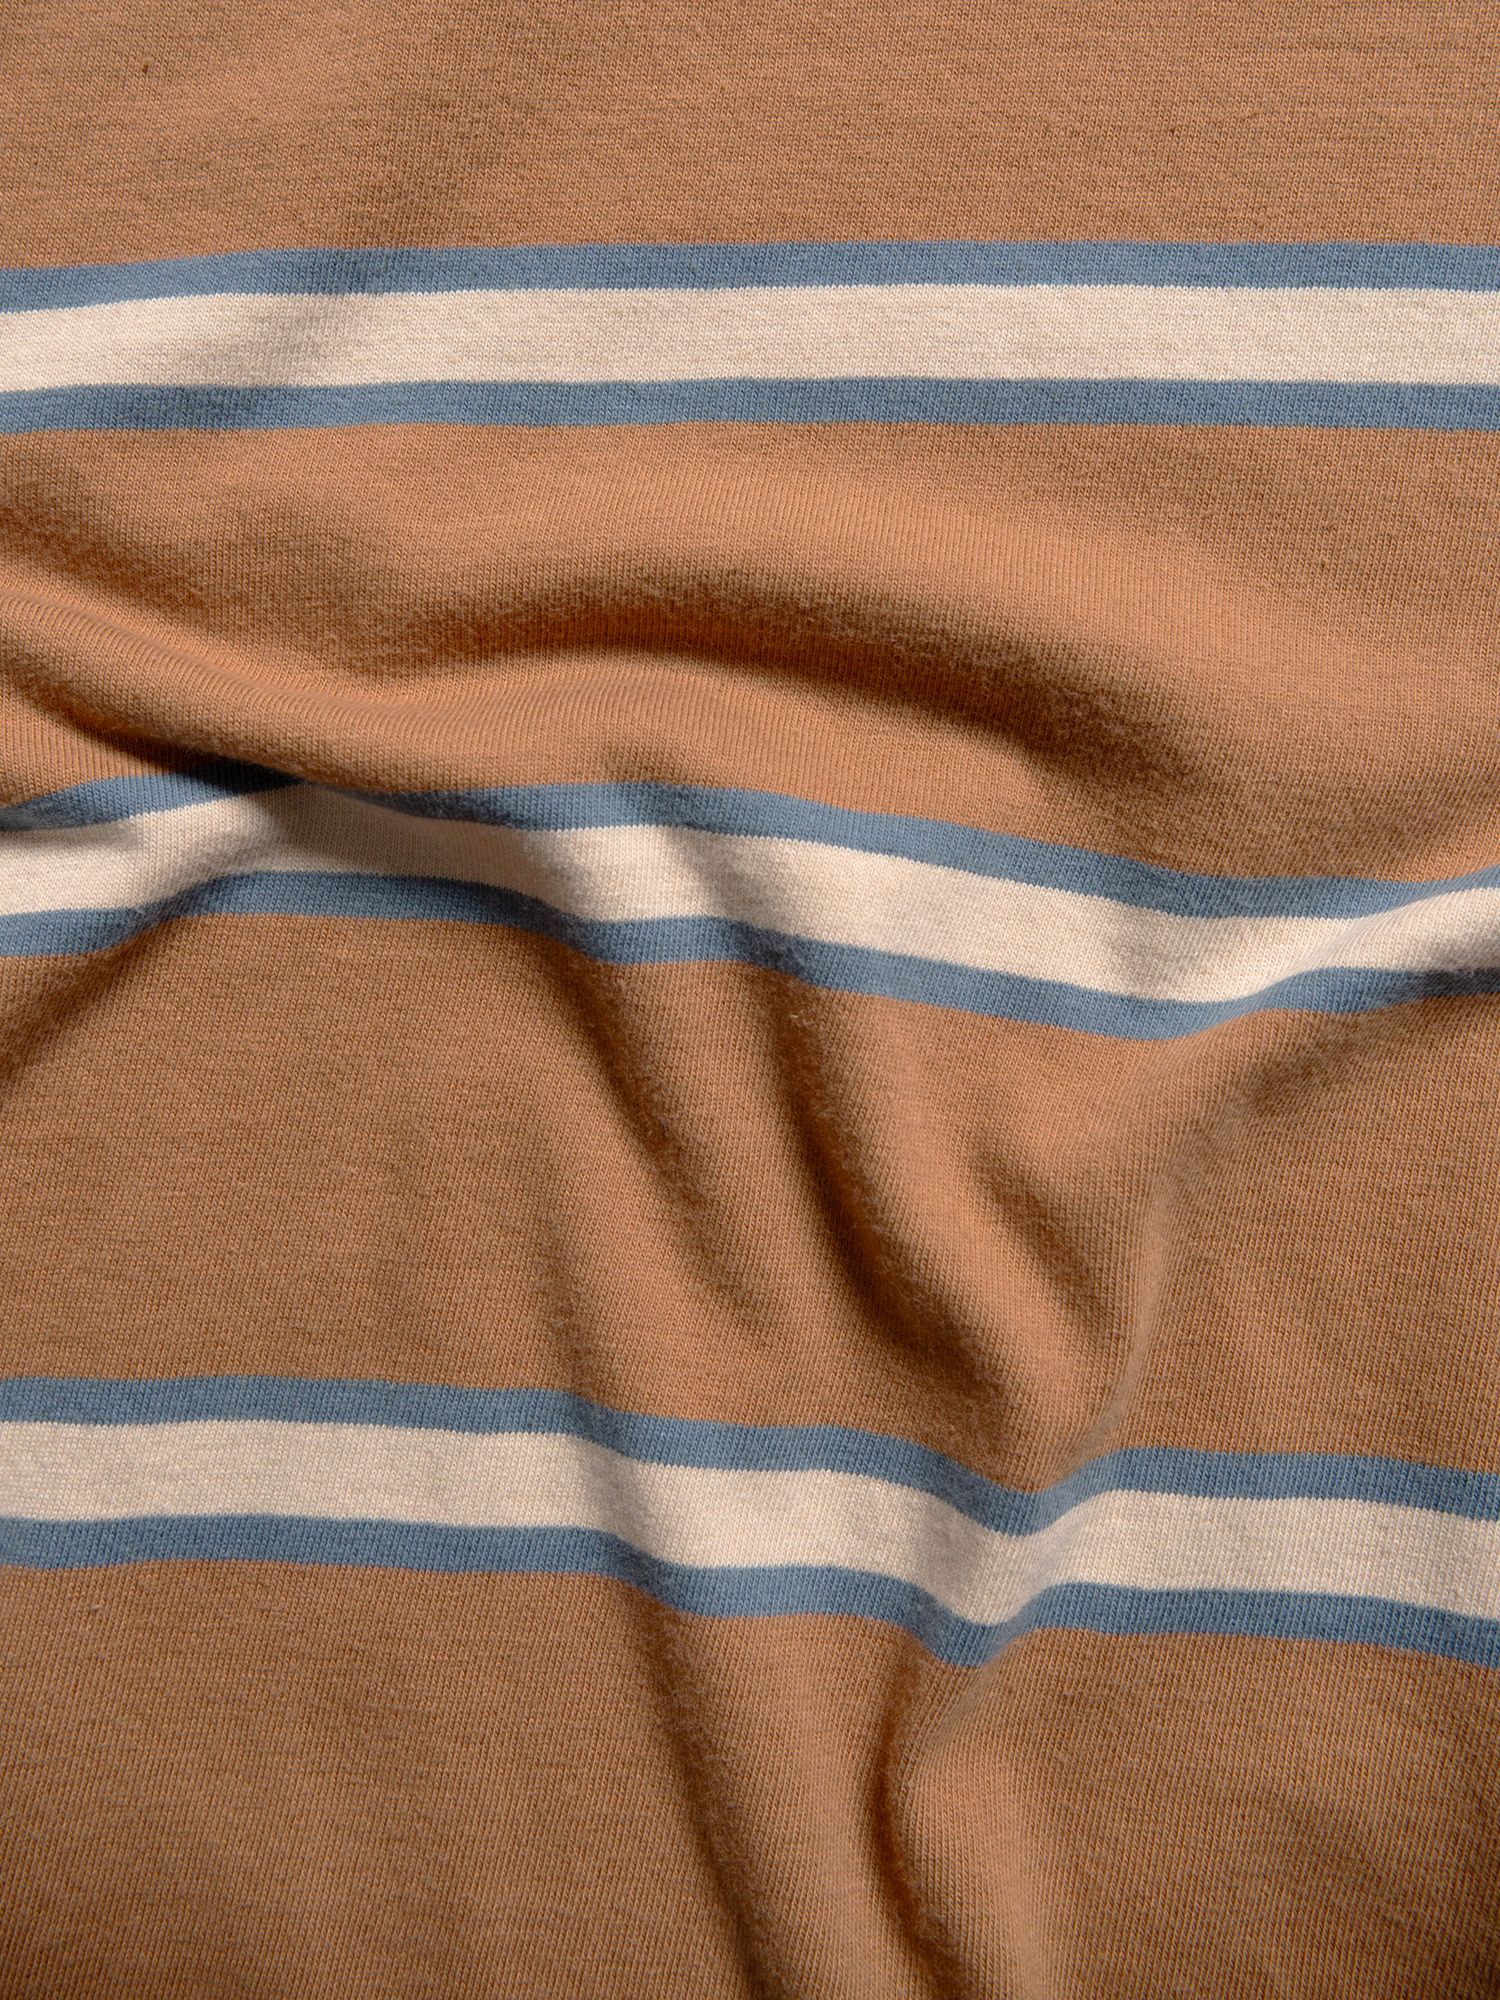 Buy Nudie Jeans Leffe Stripe T-Shirt, Brown/White Online at johnlewis.com